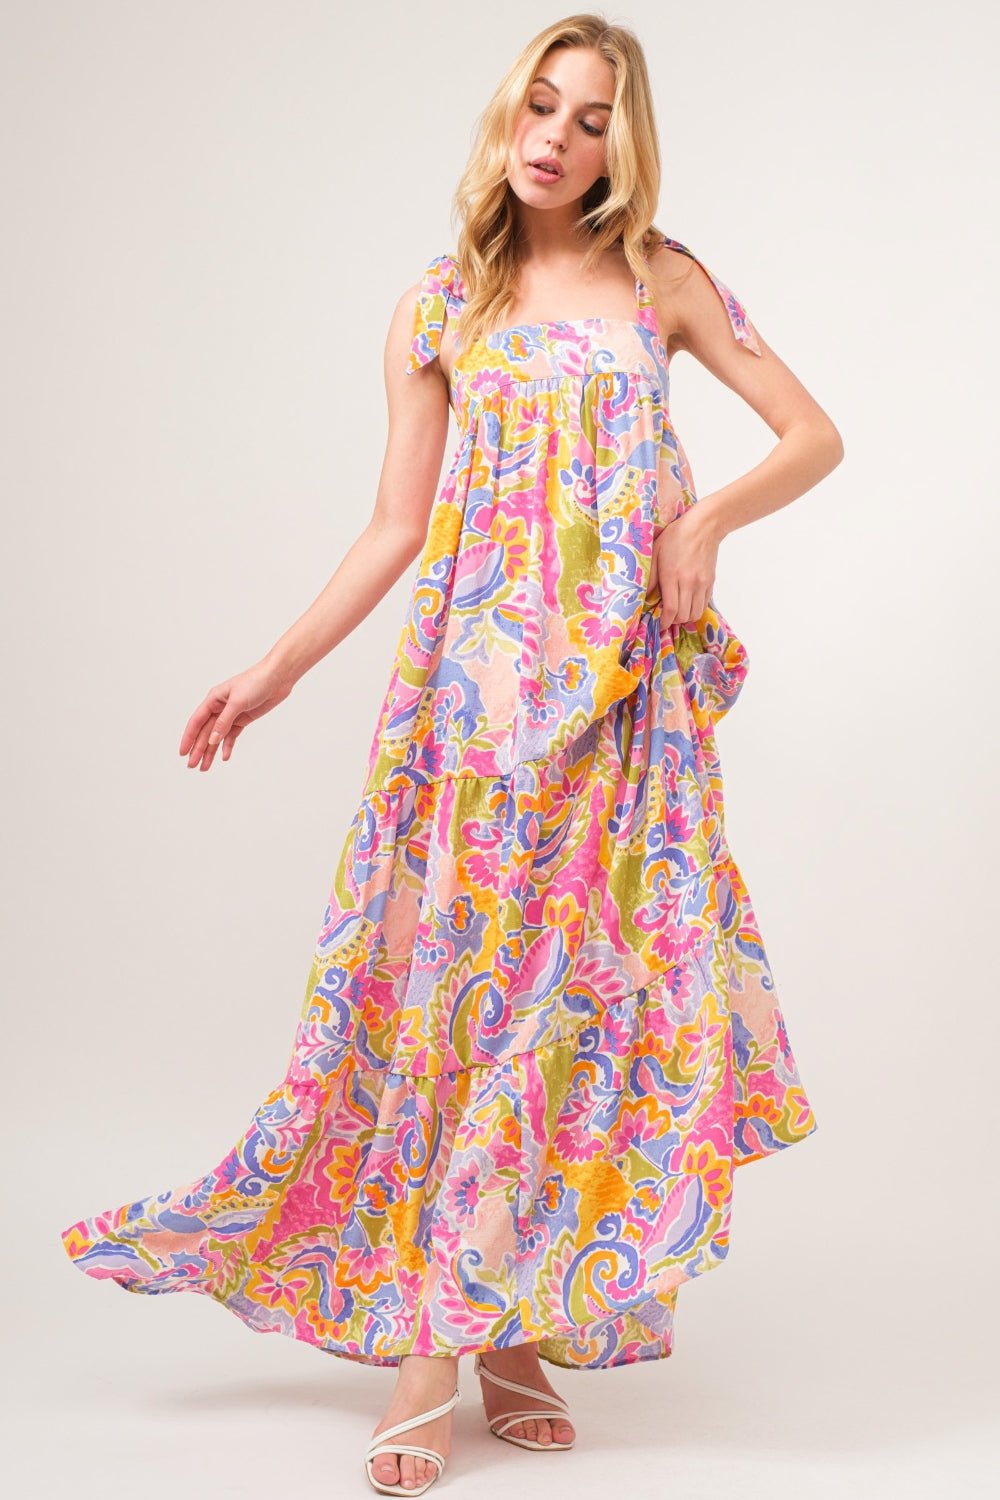 Multicolor Print Tie Shoulder Tiered Maxi DressMaxi DressAnd the Why